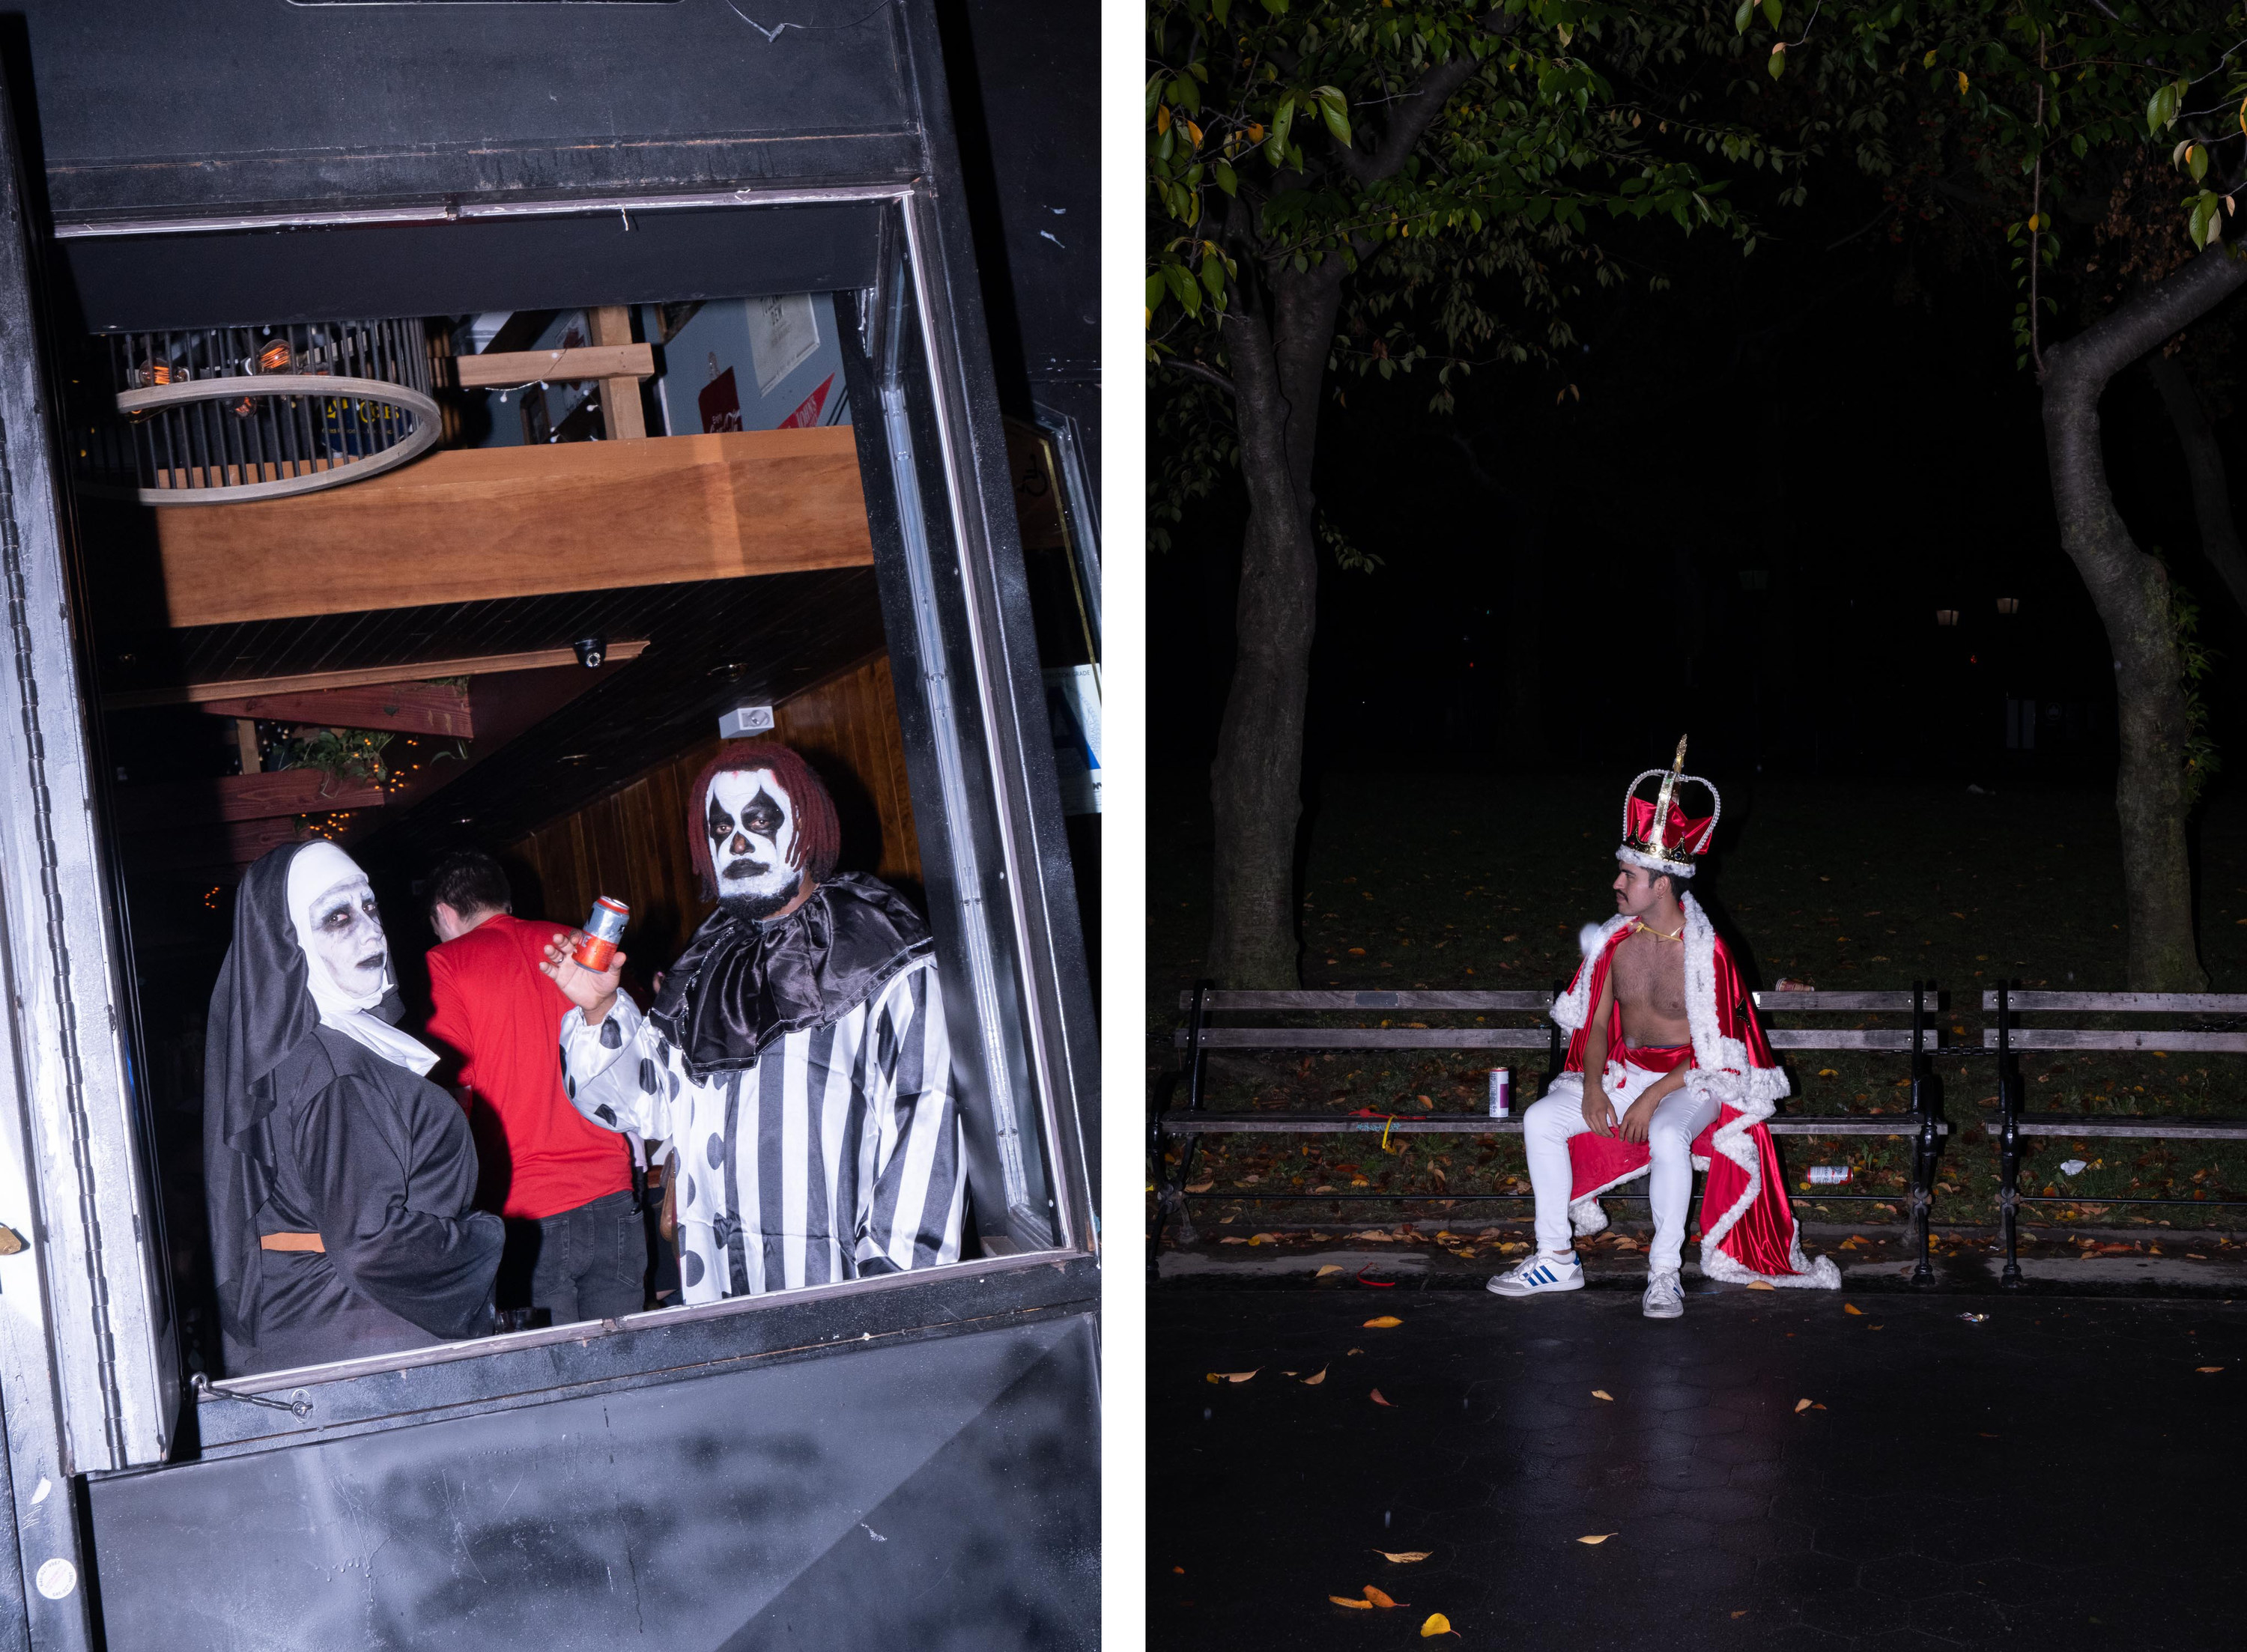 Left, a nun and a clown in face makeup look out the window of a bar, right, a man in adidas and a king costume sits alone on a bench 